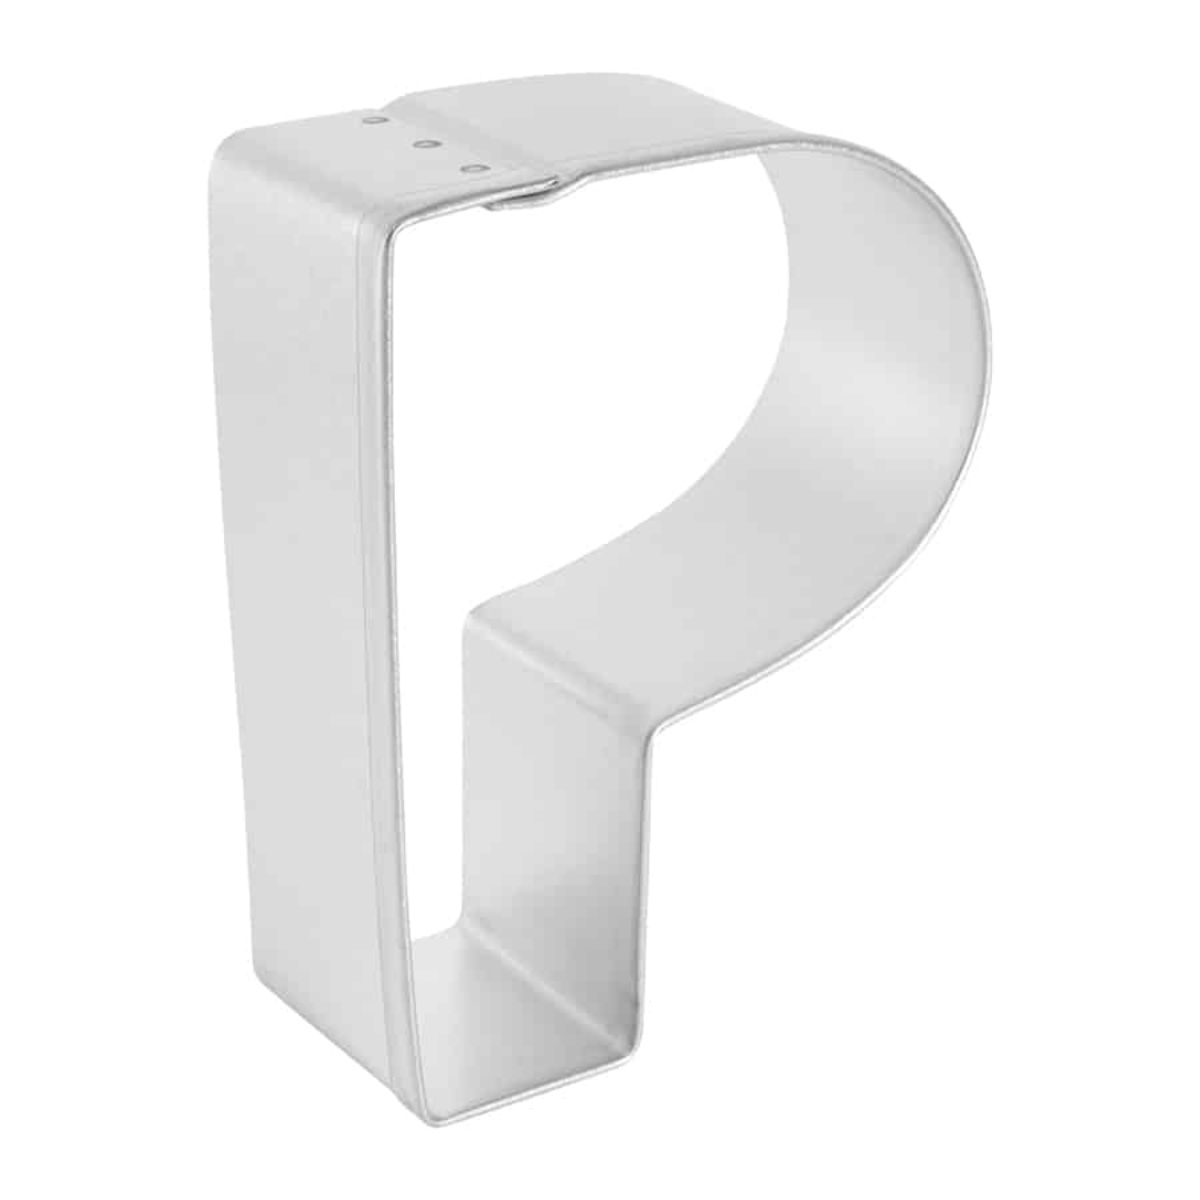 R&M Letter "P" Cookie Cutter 2.75"